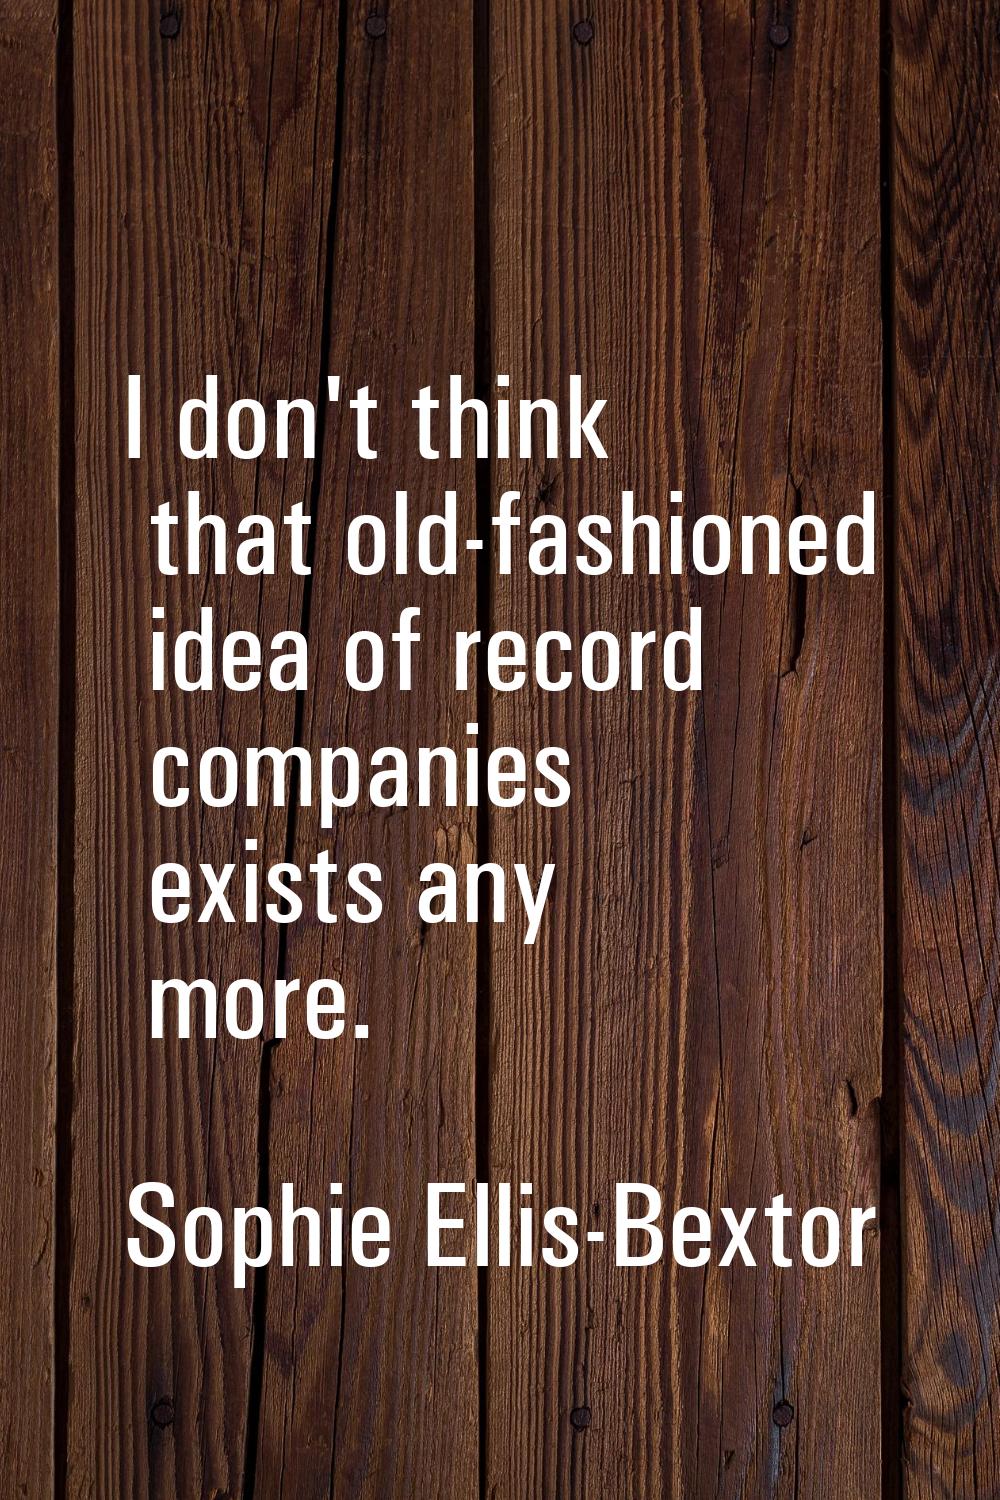 I don't think that old-fashioned idea of record companies exists any more.